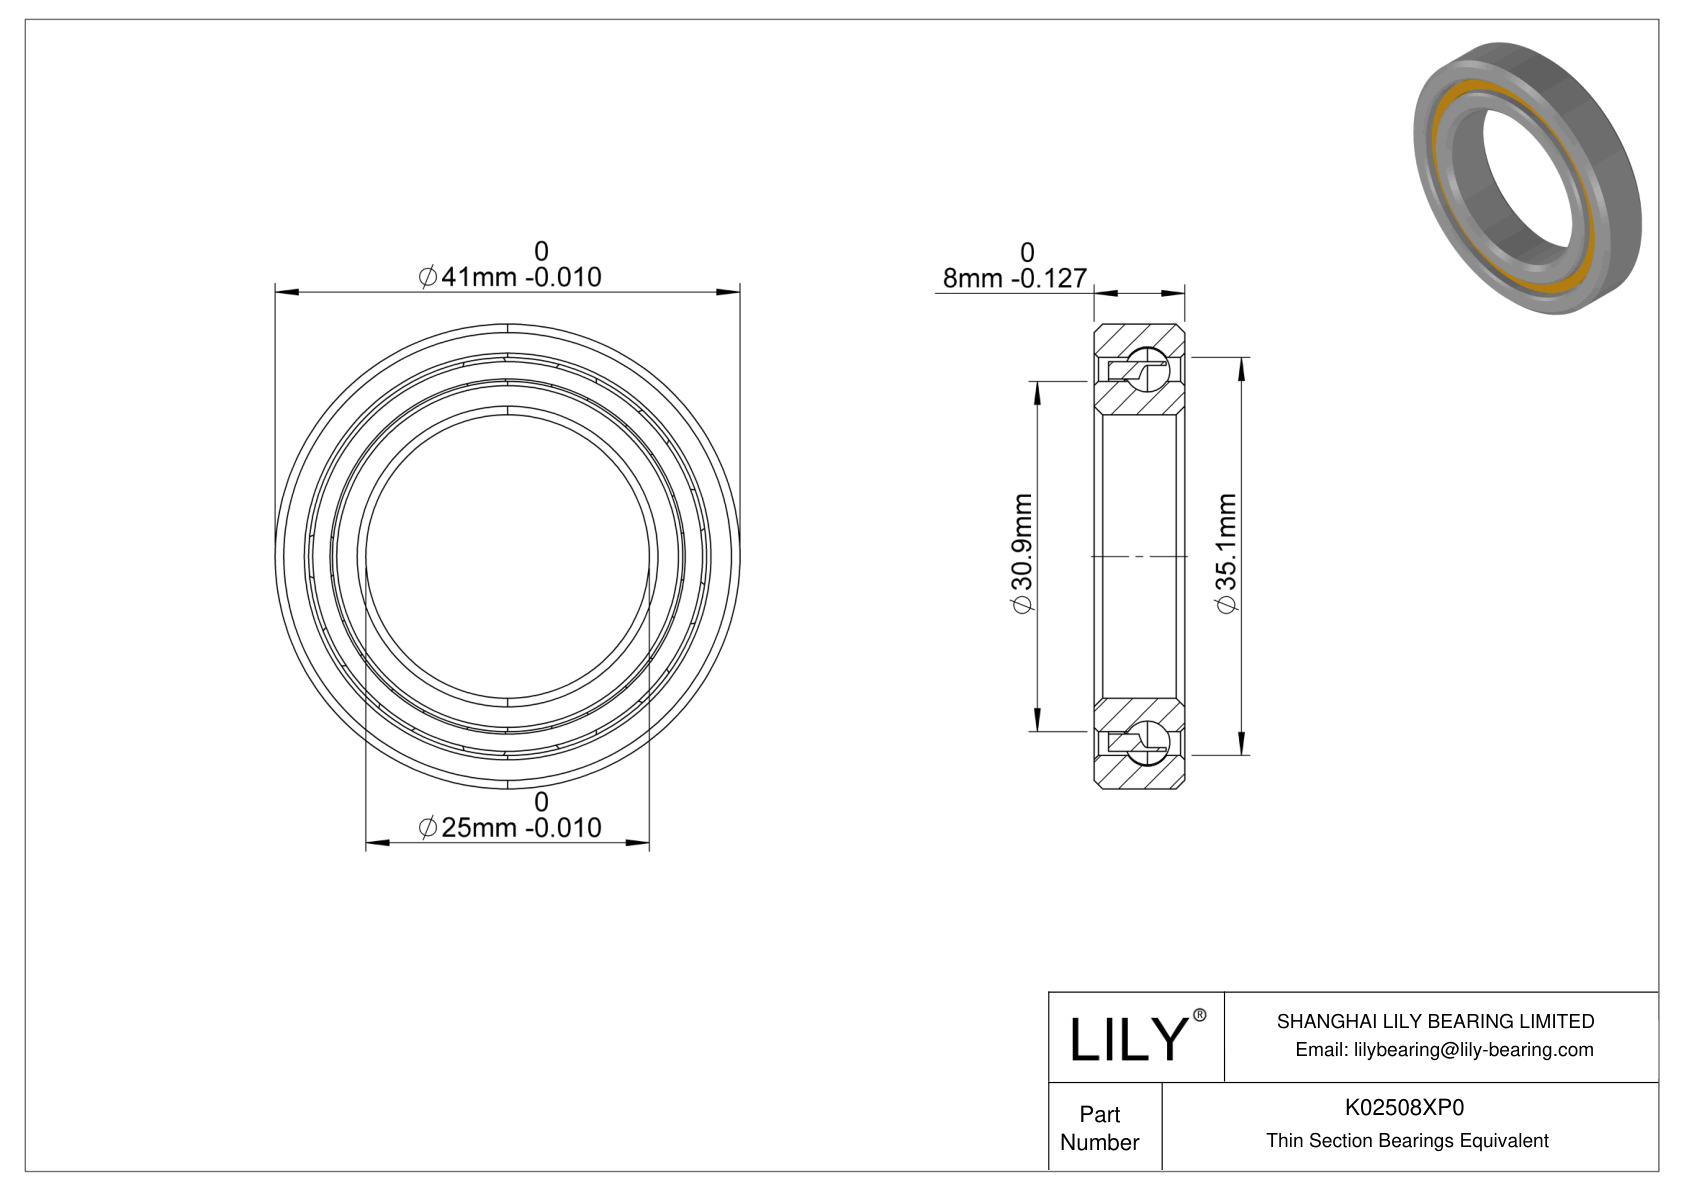 K02508XP0 Constant Section (CS) Bearings cad drawing